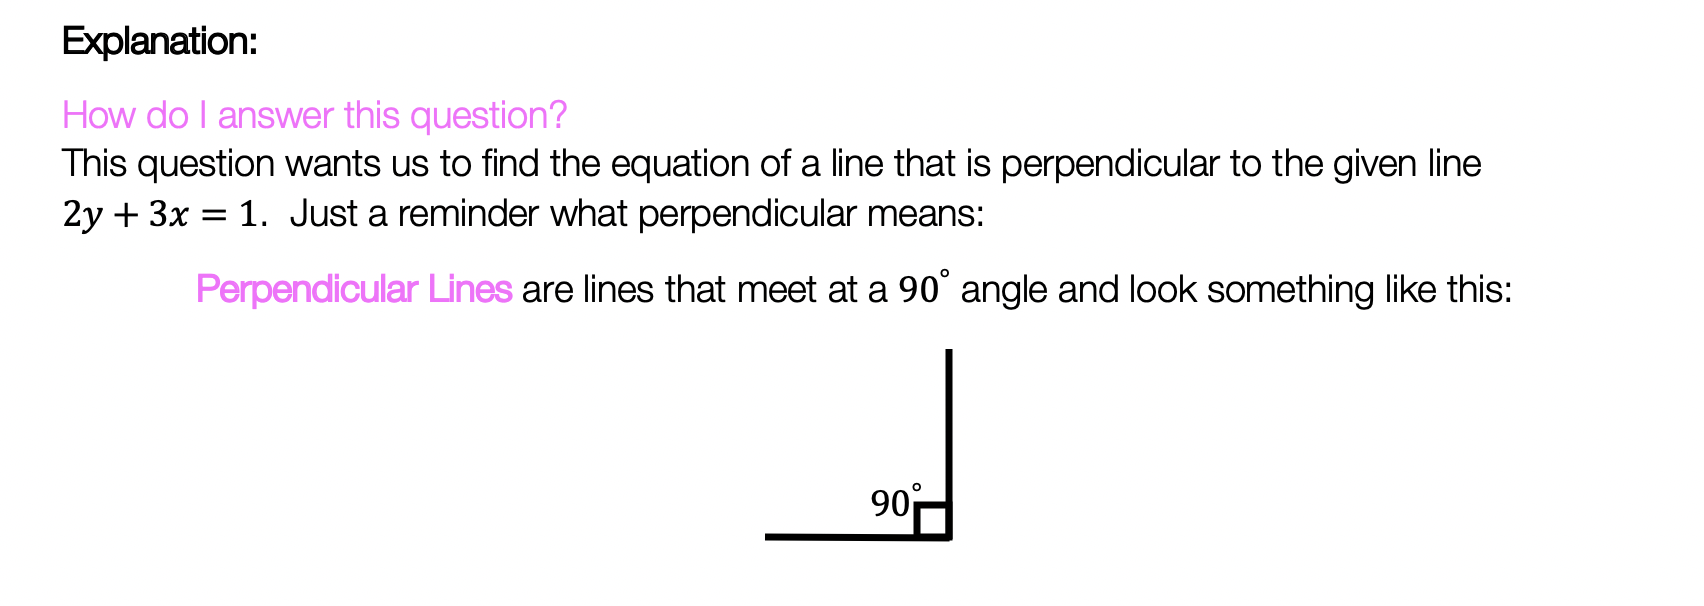 Perpendicular Lines through a Given Point